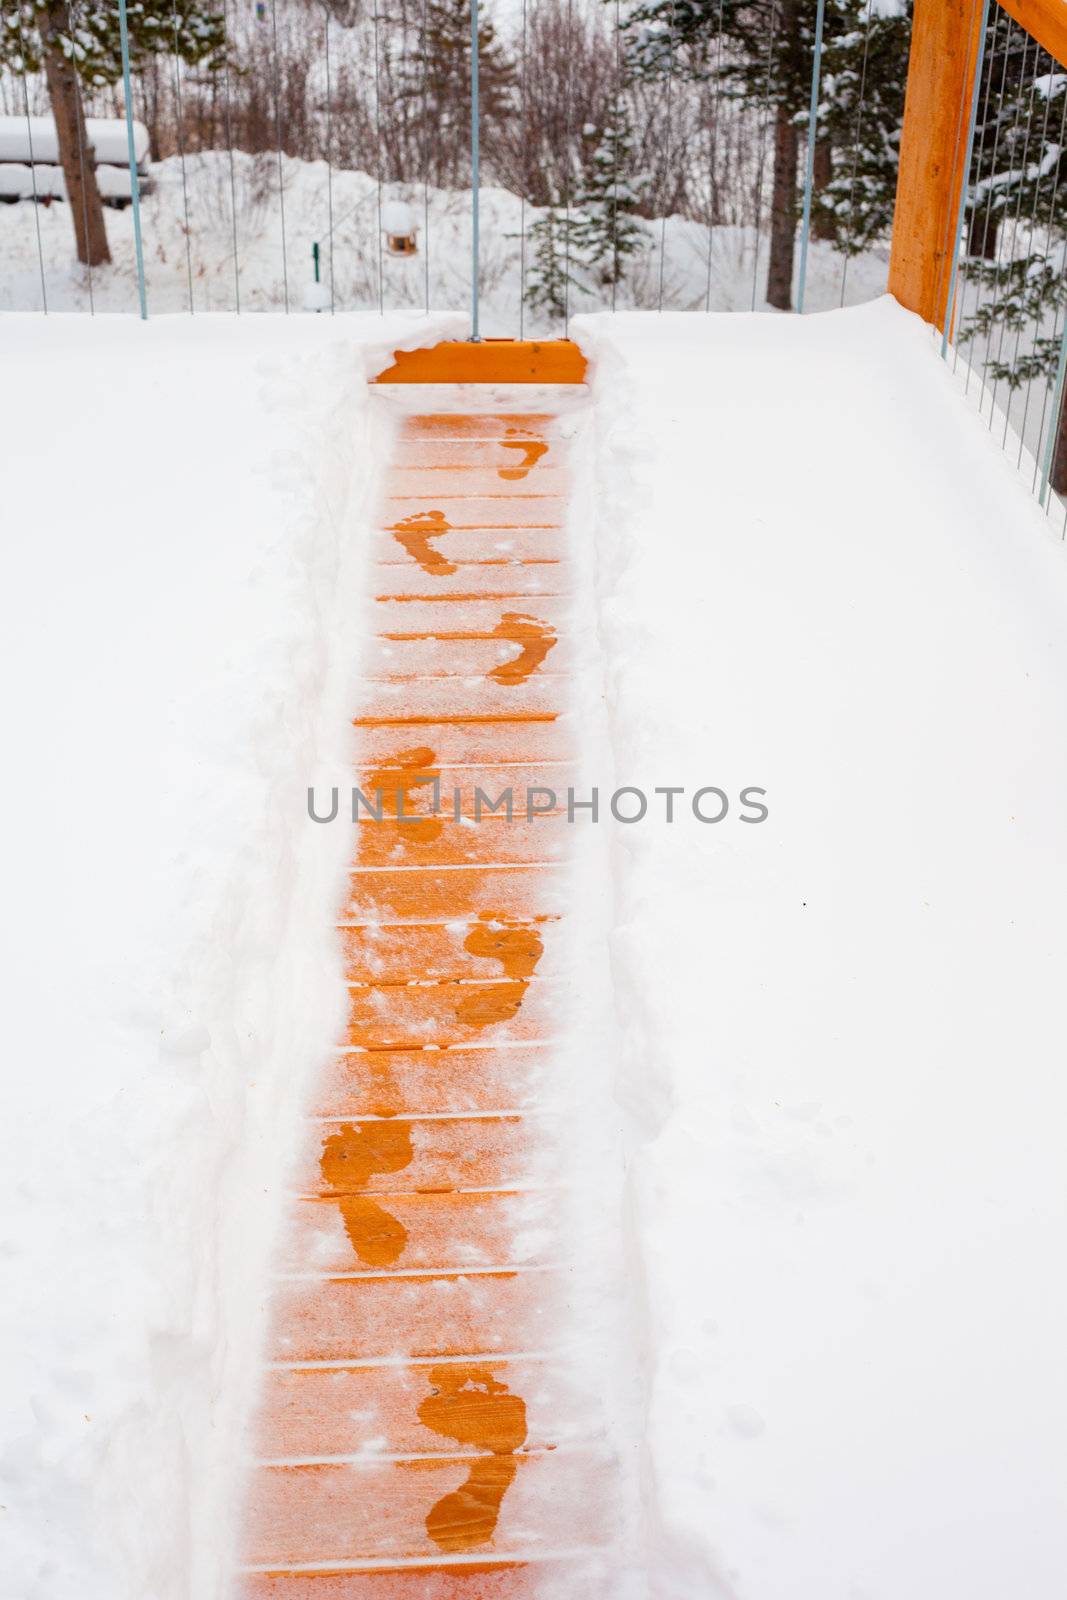 Footsteps of person trying to escape winter by jumping over railing of snow covered wooden deck.